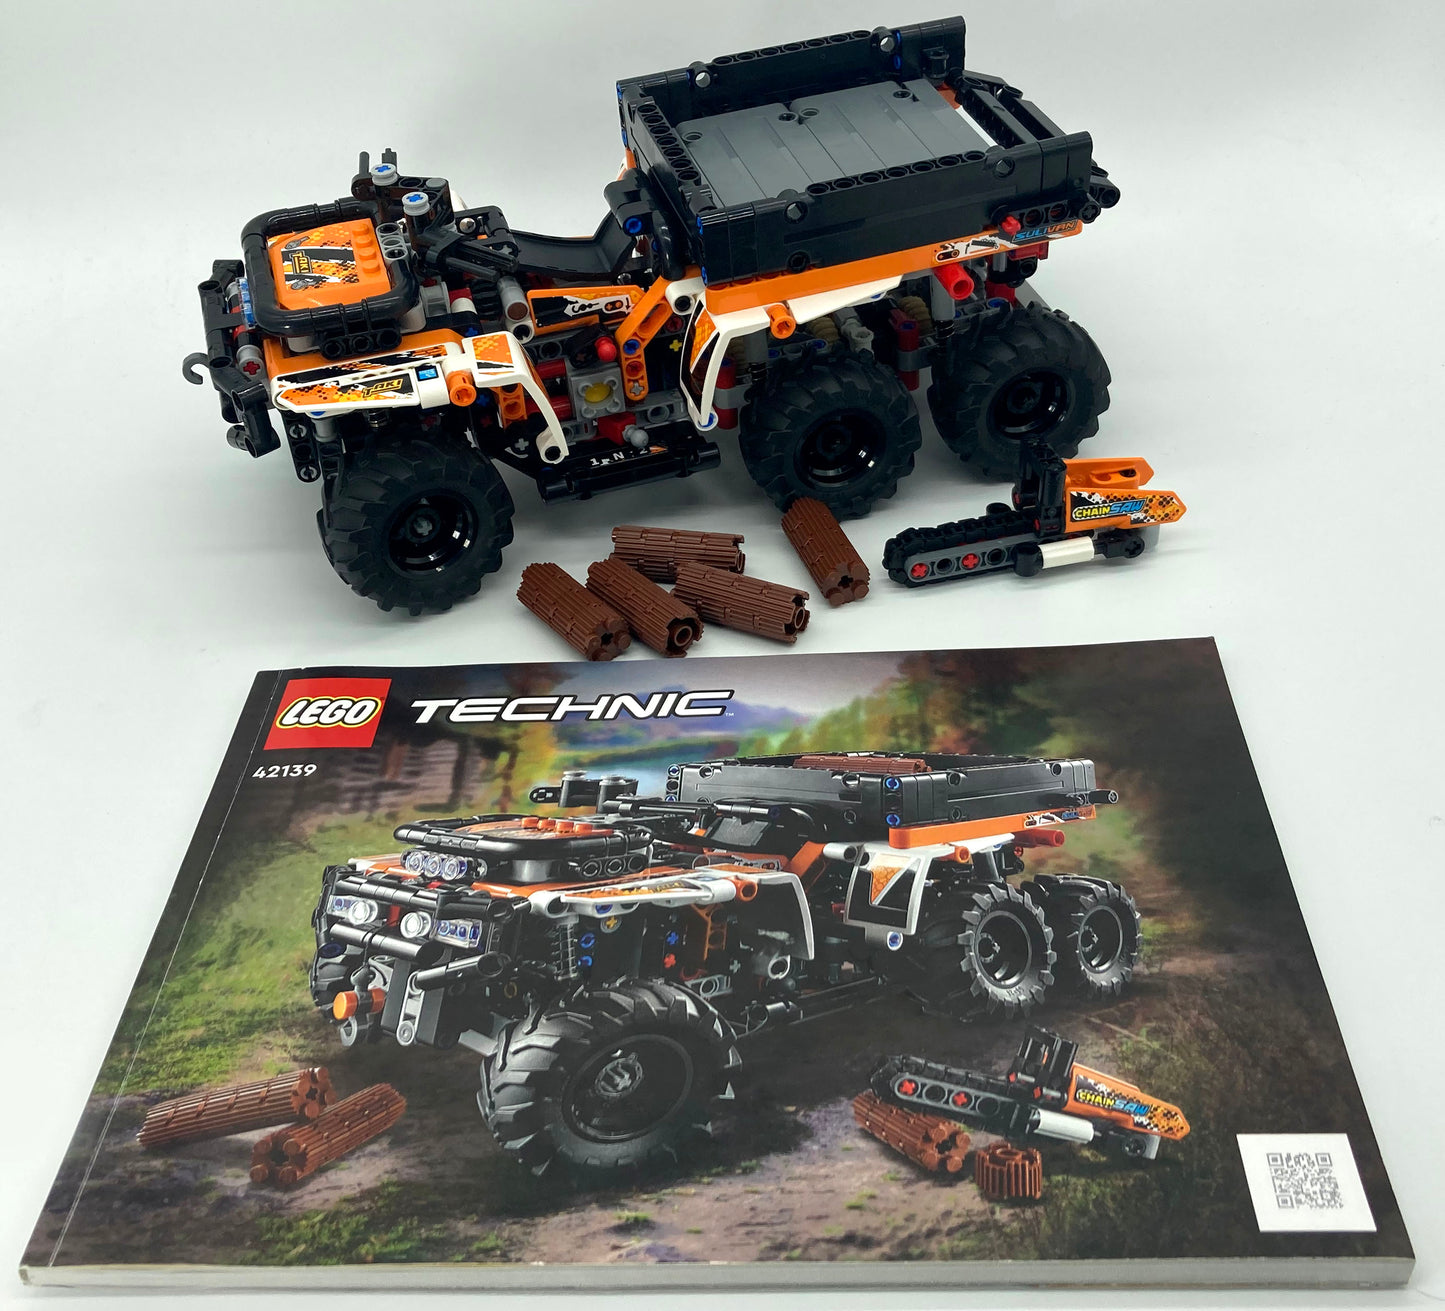 Used Set 42139 All-Terrain Vehicle (with Instruction Manual, No Box)